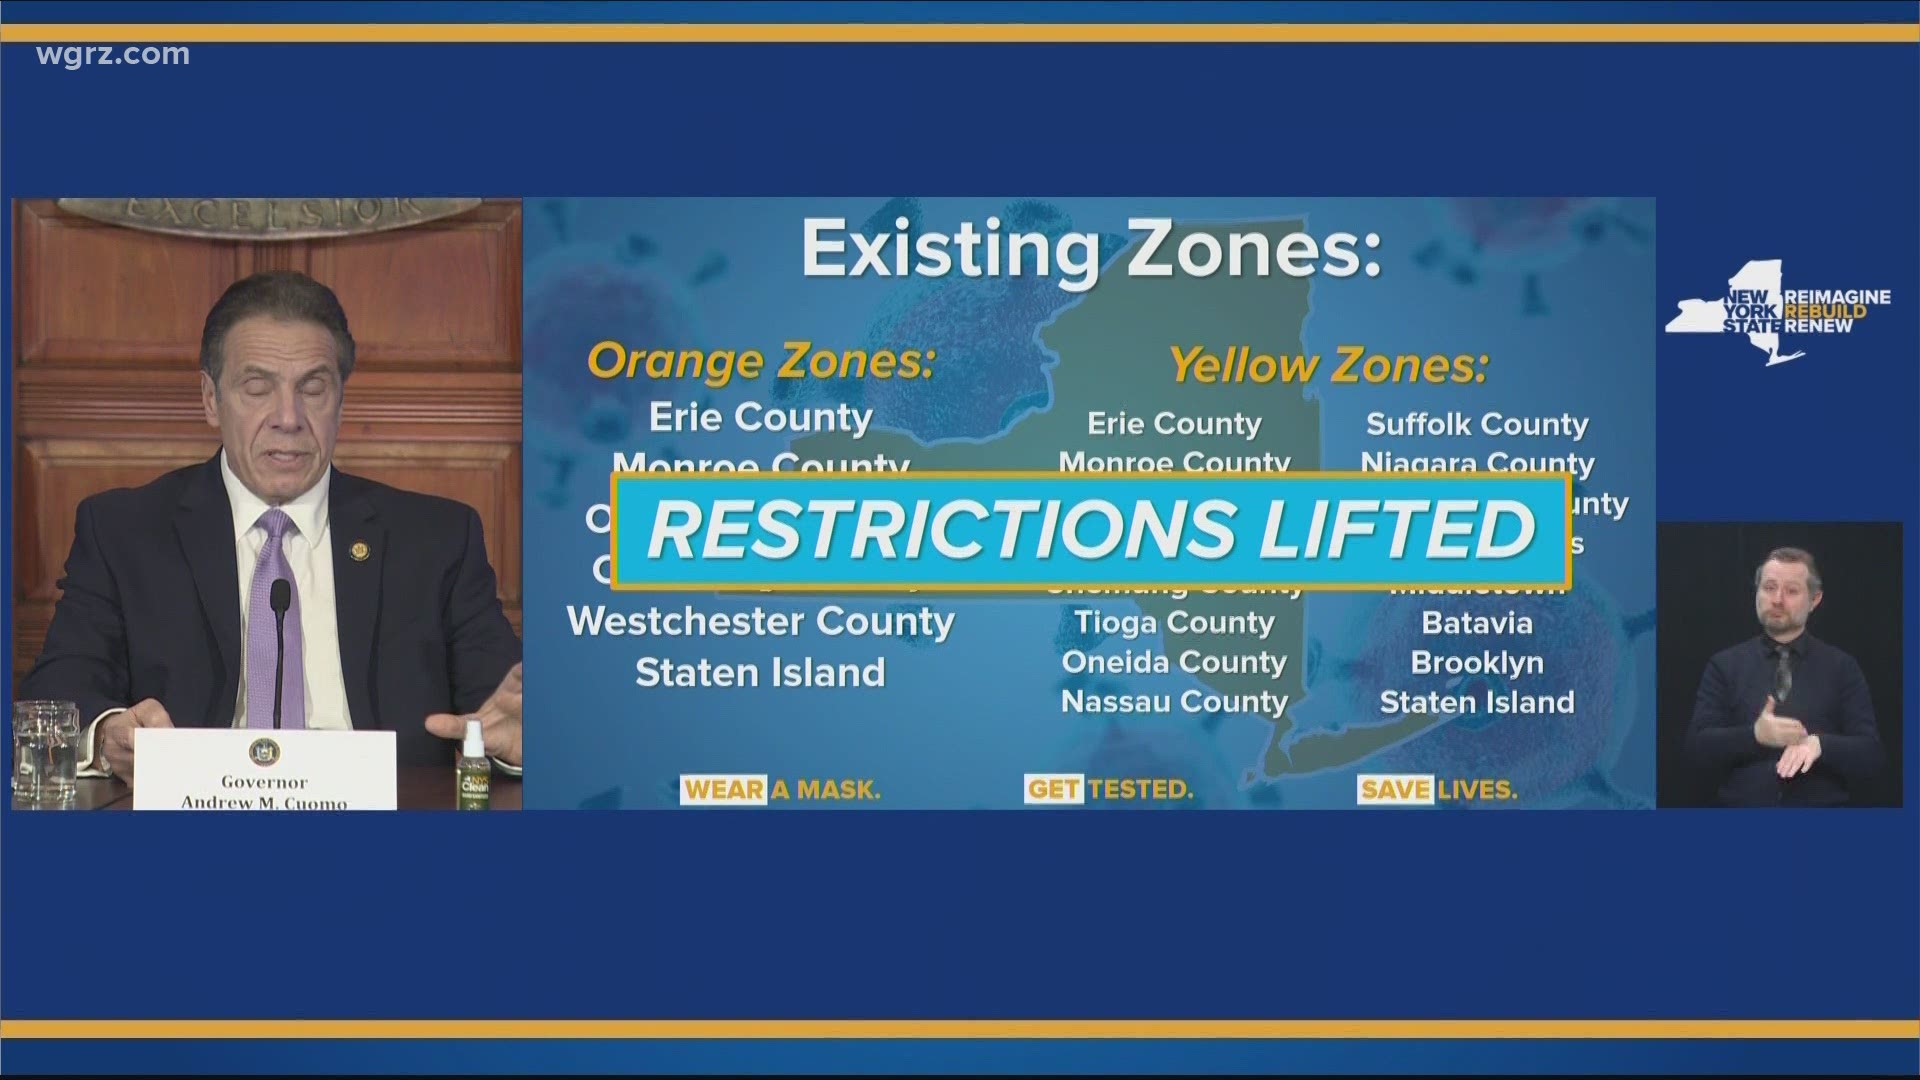 The governor says the percent positive rate in the micro cluster zones is down across the state, and because of this, all Orange Zones have been dropped across NY.